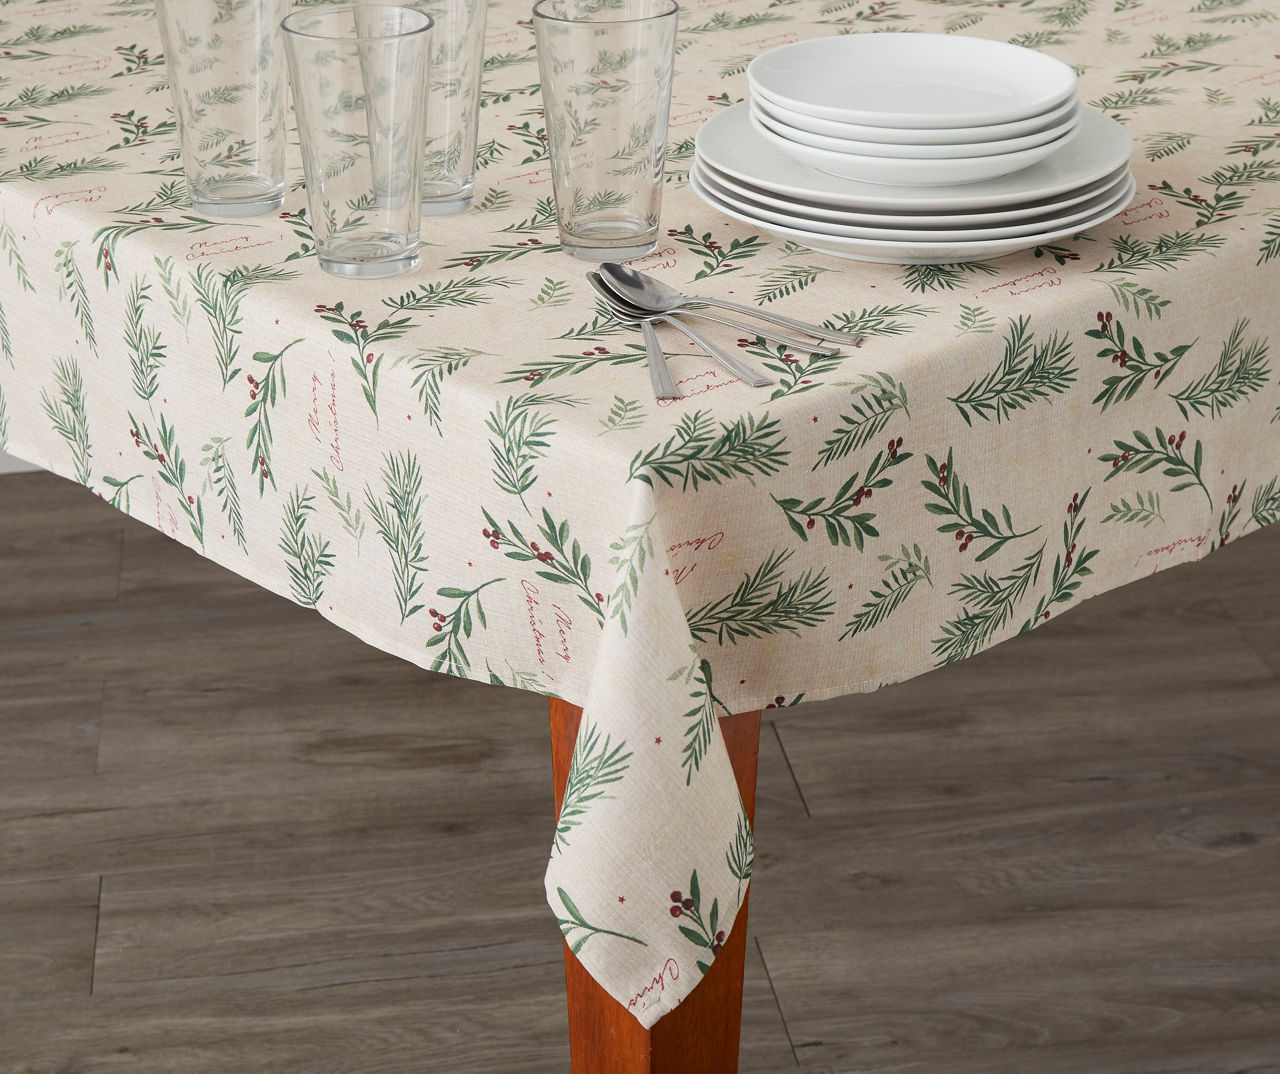 "Merry Christmas" Beige Pine Sprig Tablecloth, (52" x 70")